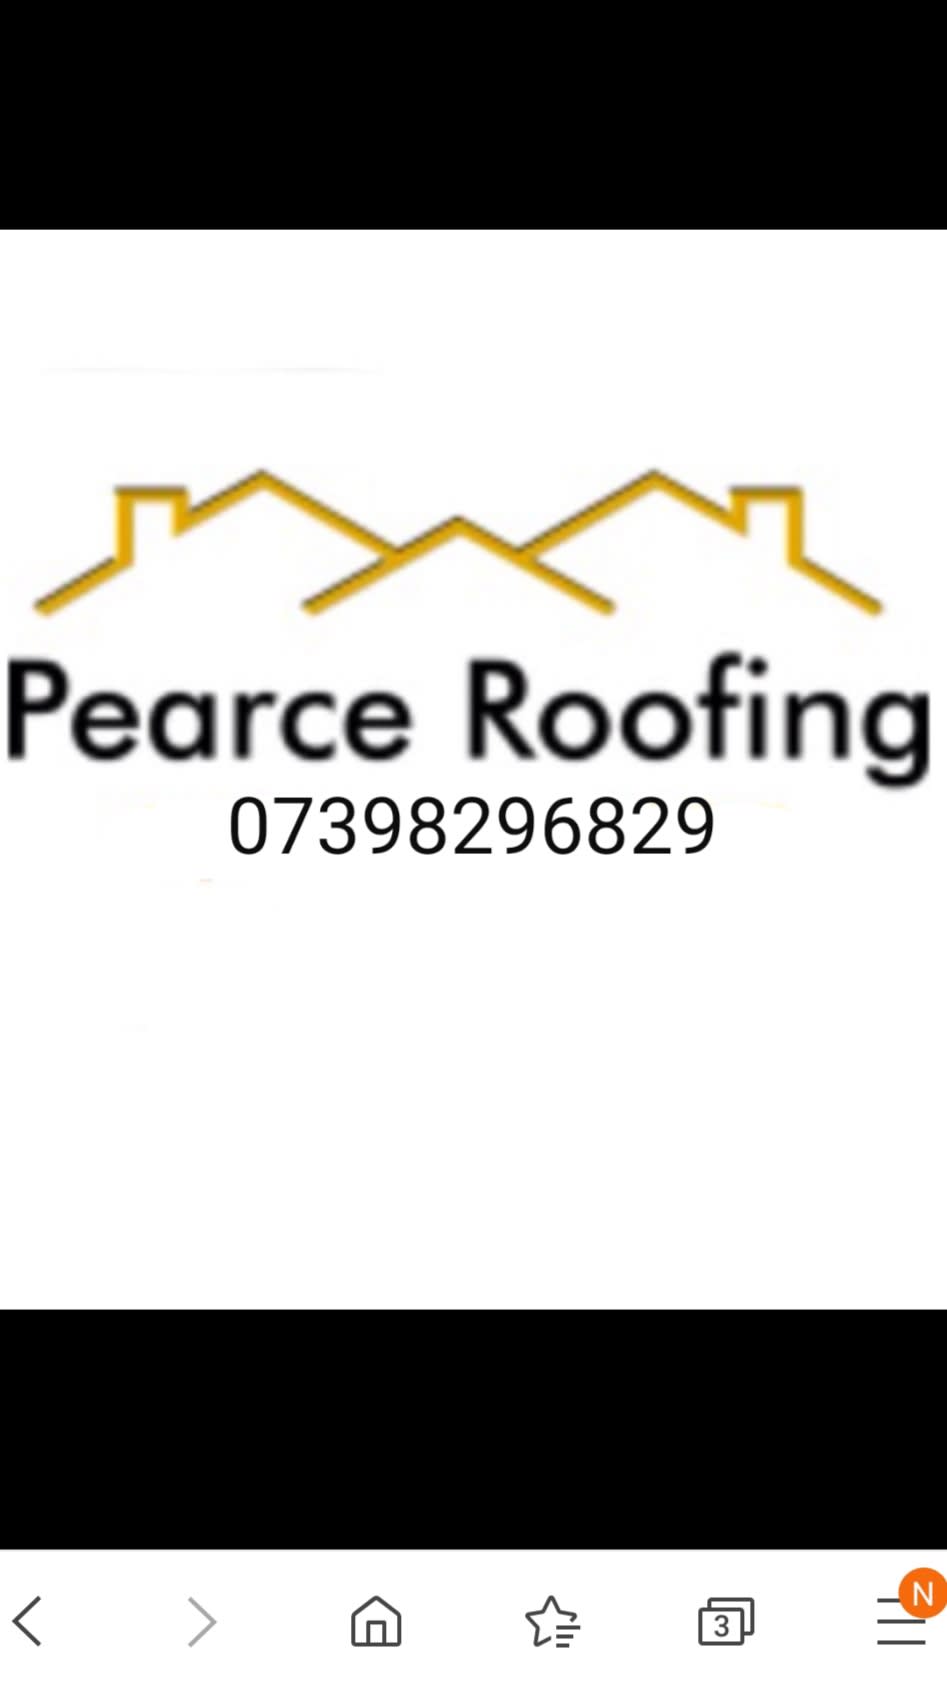 Pearce Roofing